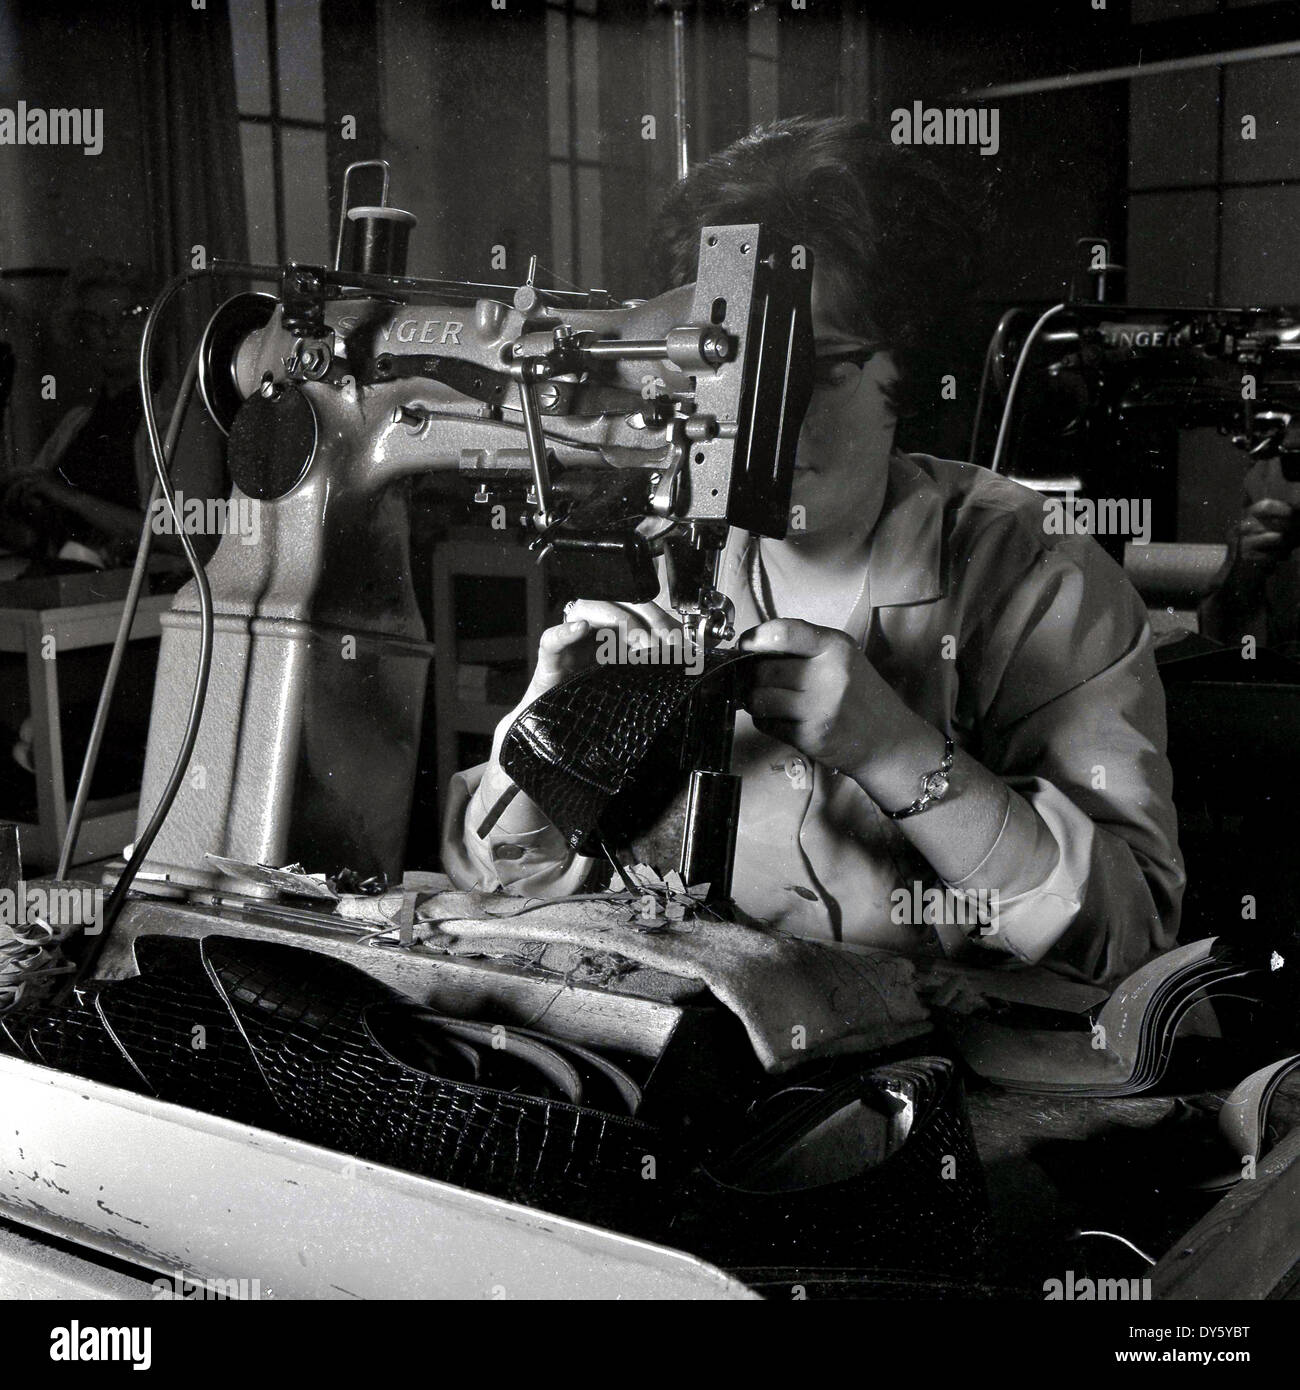 1950s, historical, a female worker using an industrial Singer sewing machine to sew or stitch a leather shoe at the Glenfield Progress Co-Operative Society limited, a boot and shoe business in Glenfield, Leicester, England, UK. The business specialised in women's and children's footwear. Historically Leicestershire was an important area of Britain for shoe manufacture and in 1872 the Co-operative Wholesale Society began making shoes there. Invented by Isaac Singer in the 1820s, originally for stitching cloth, he produced a version in the 1840s that was strong enough for leather. Stock Photo